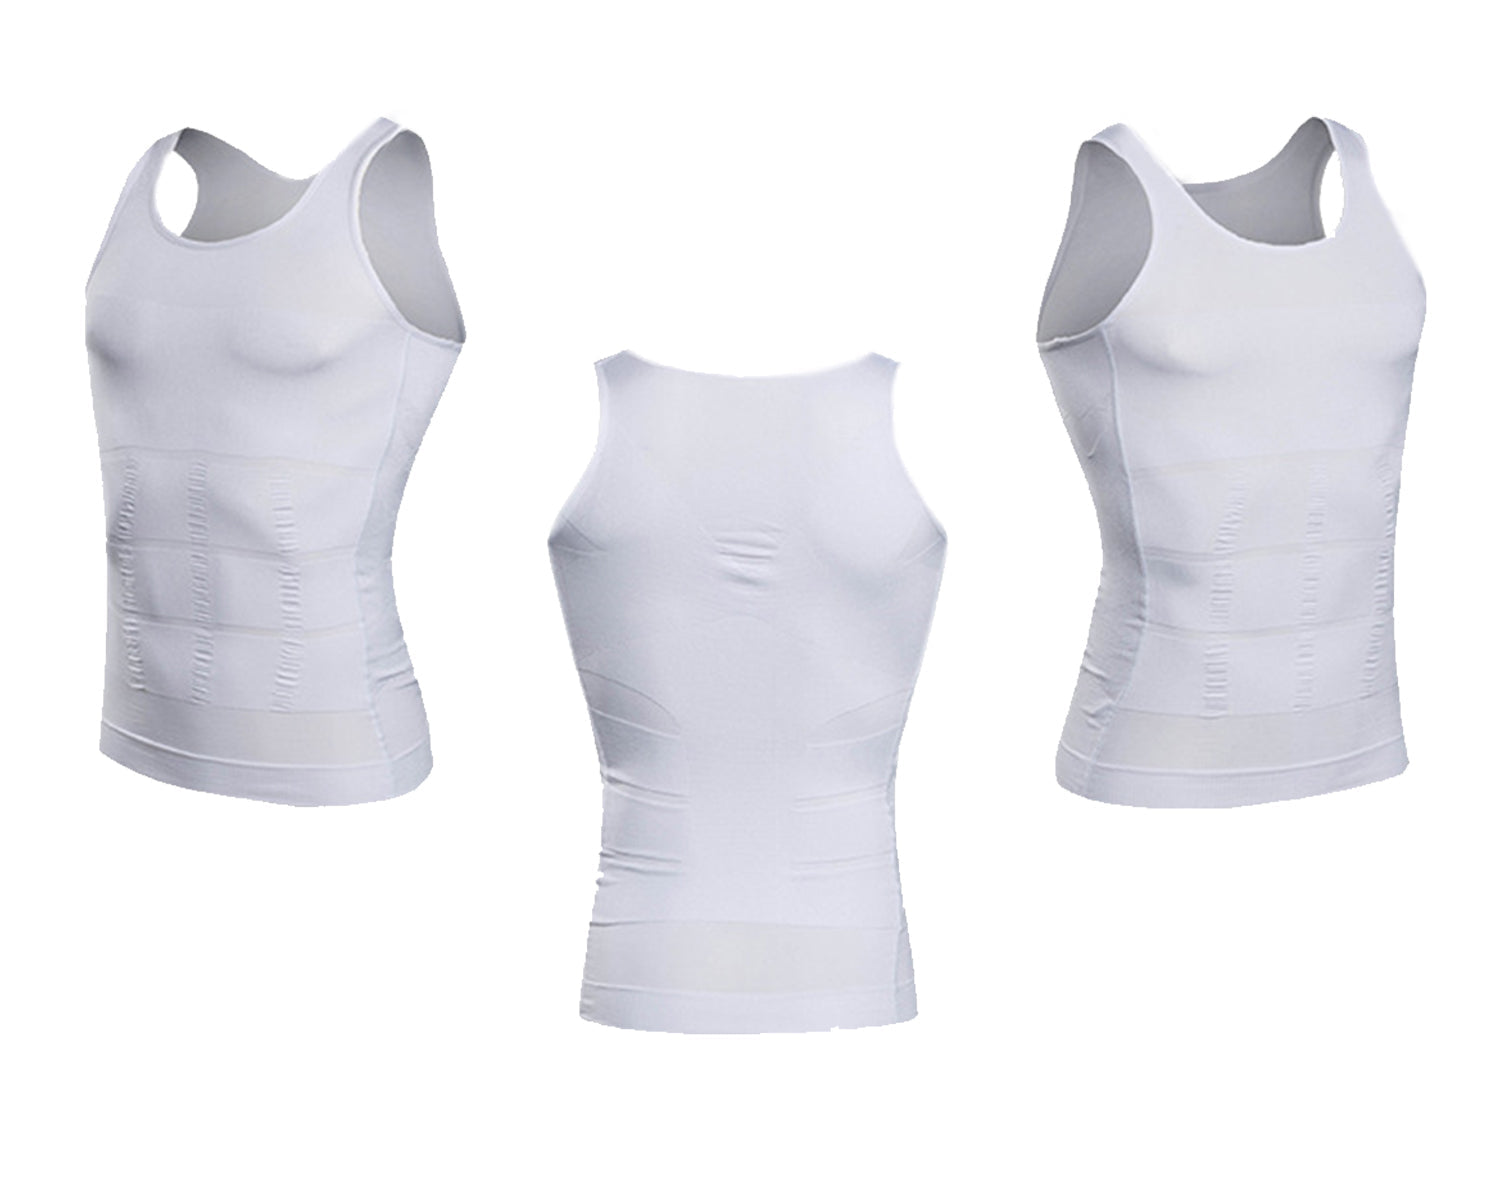 Men's Compression Body Shirt, Made in the USA